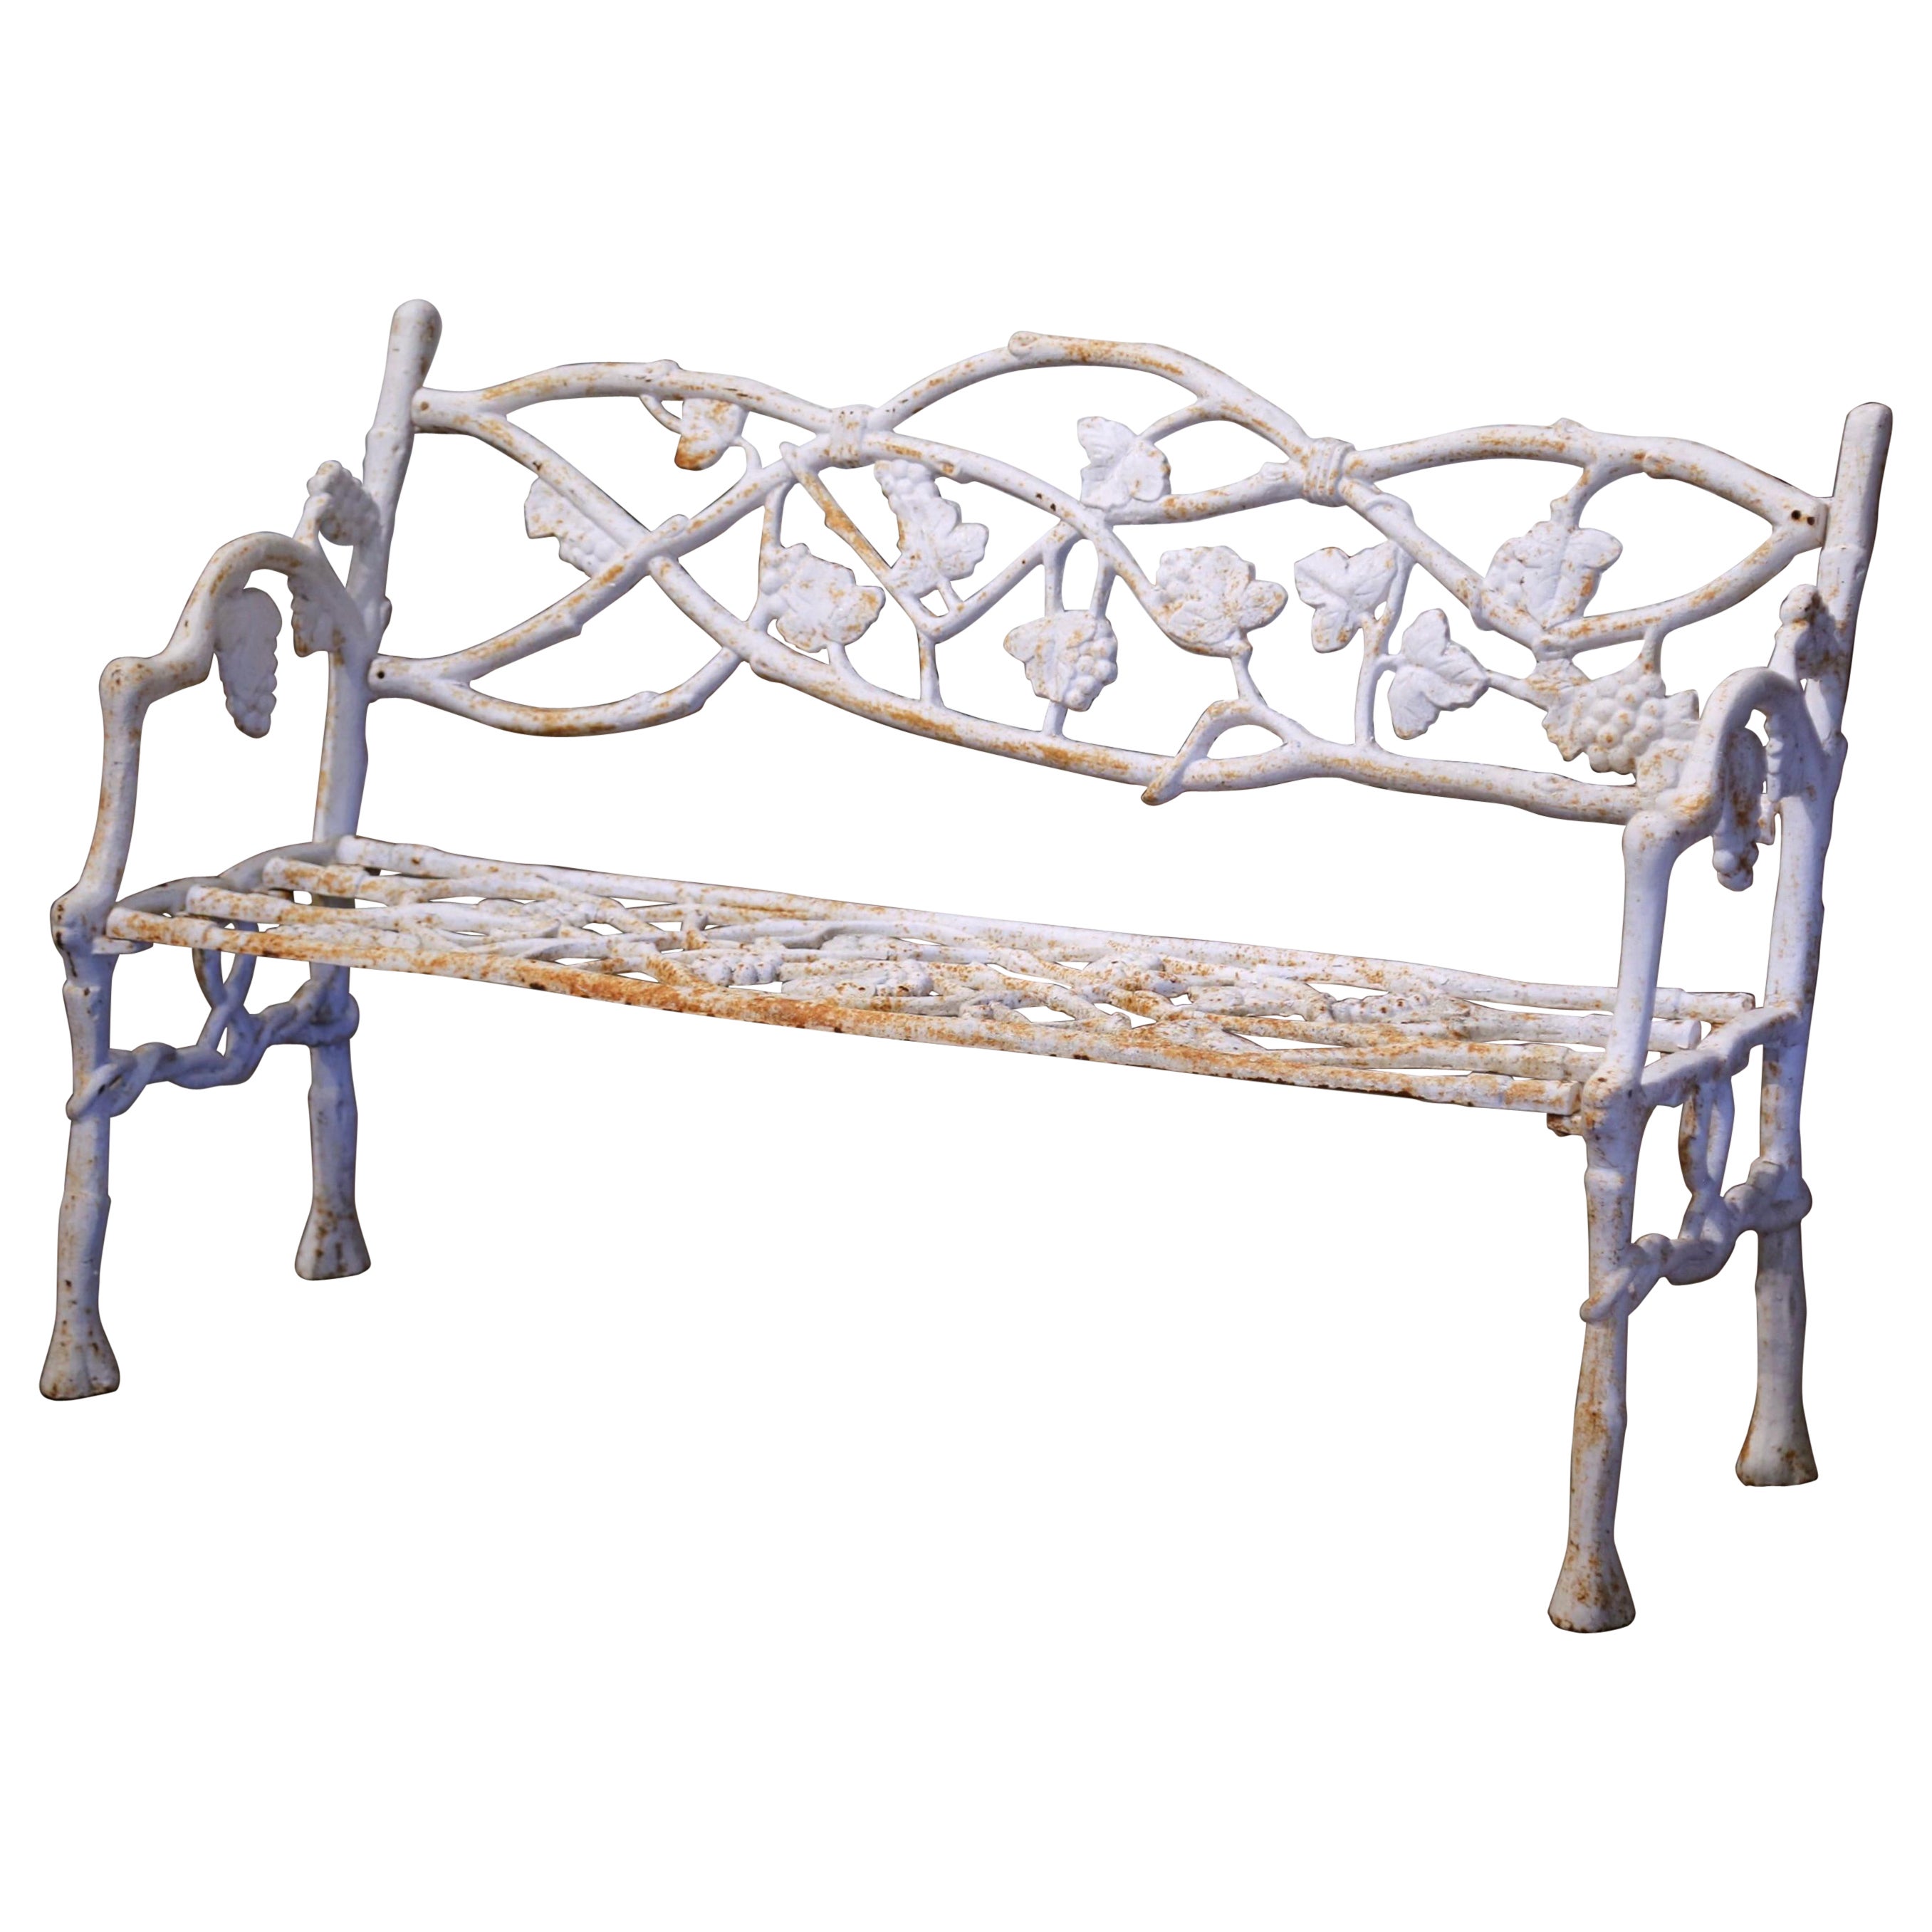 Early 20th Century French White Painted Cast Iron Garden Bench with Vine Motifs